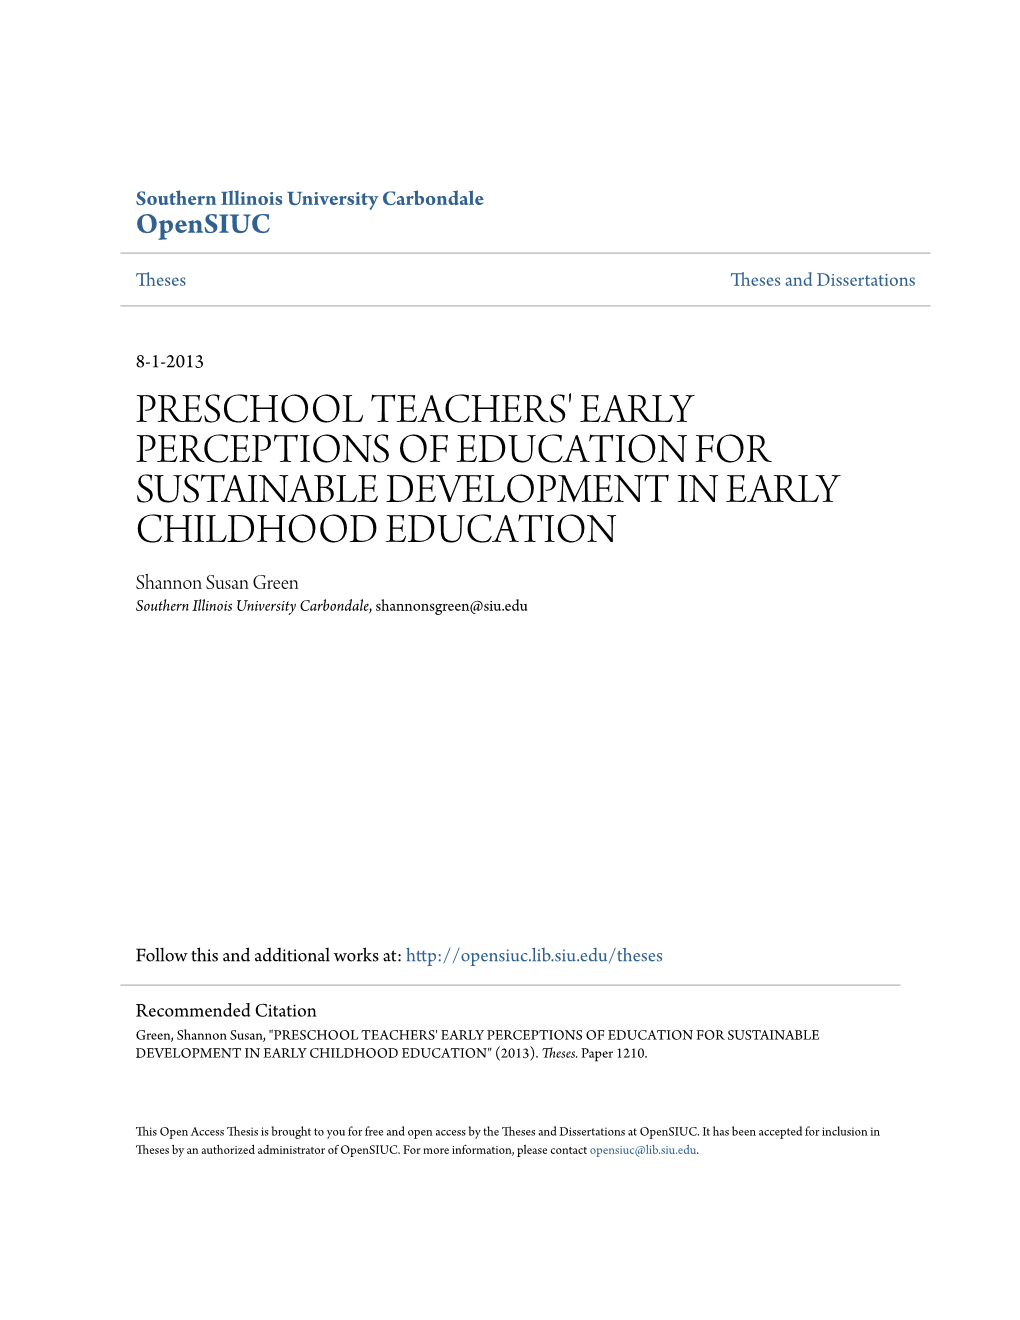 Preschool Teachers' Early Perceptions of Education for Sustainable